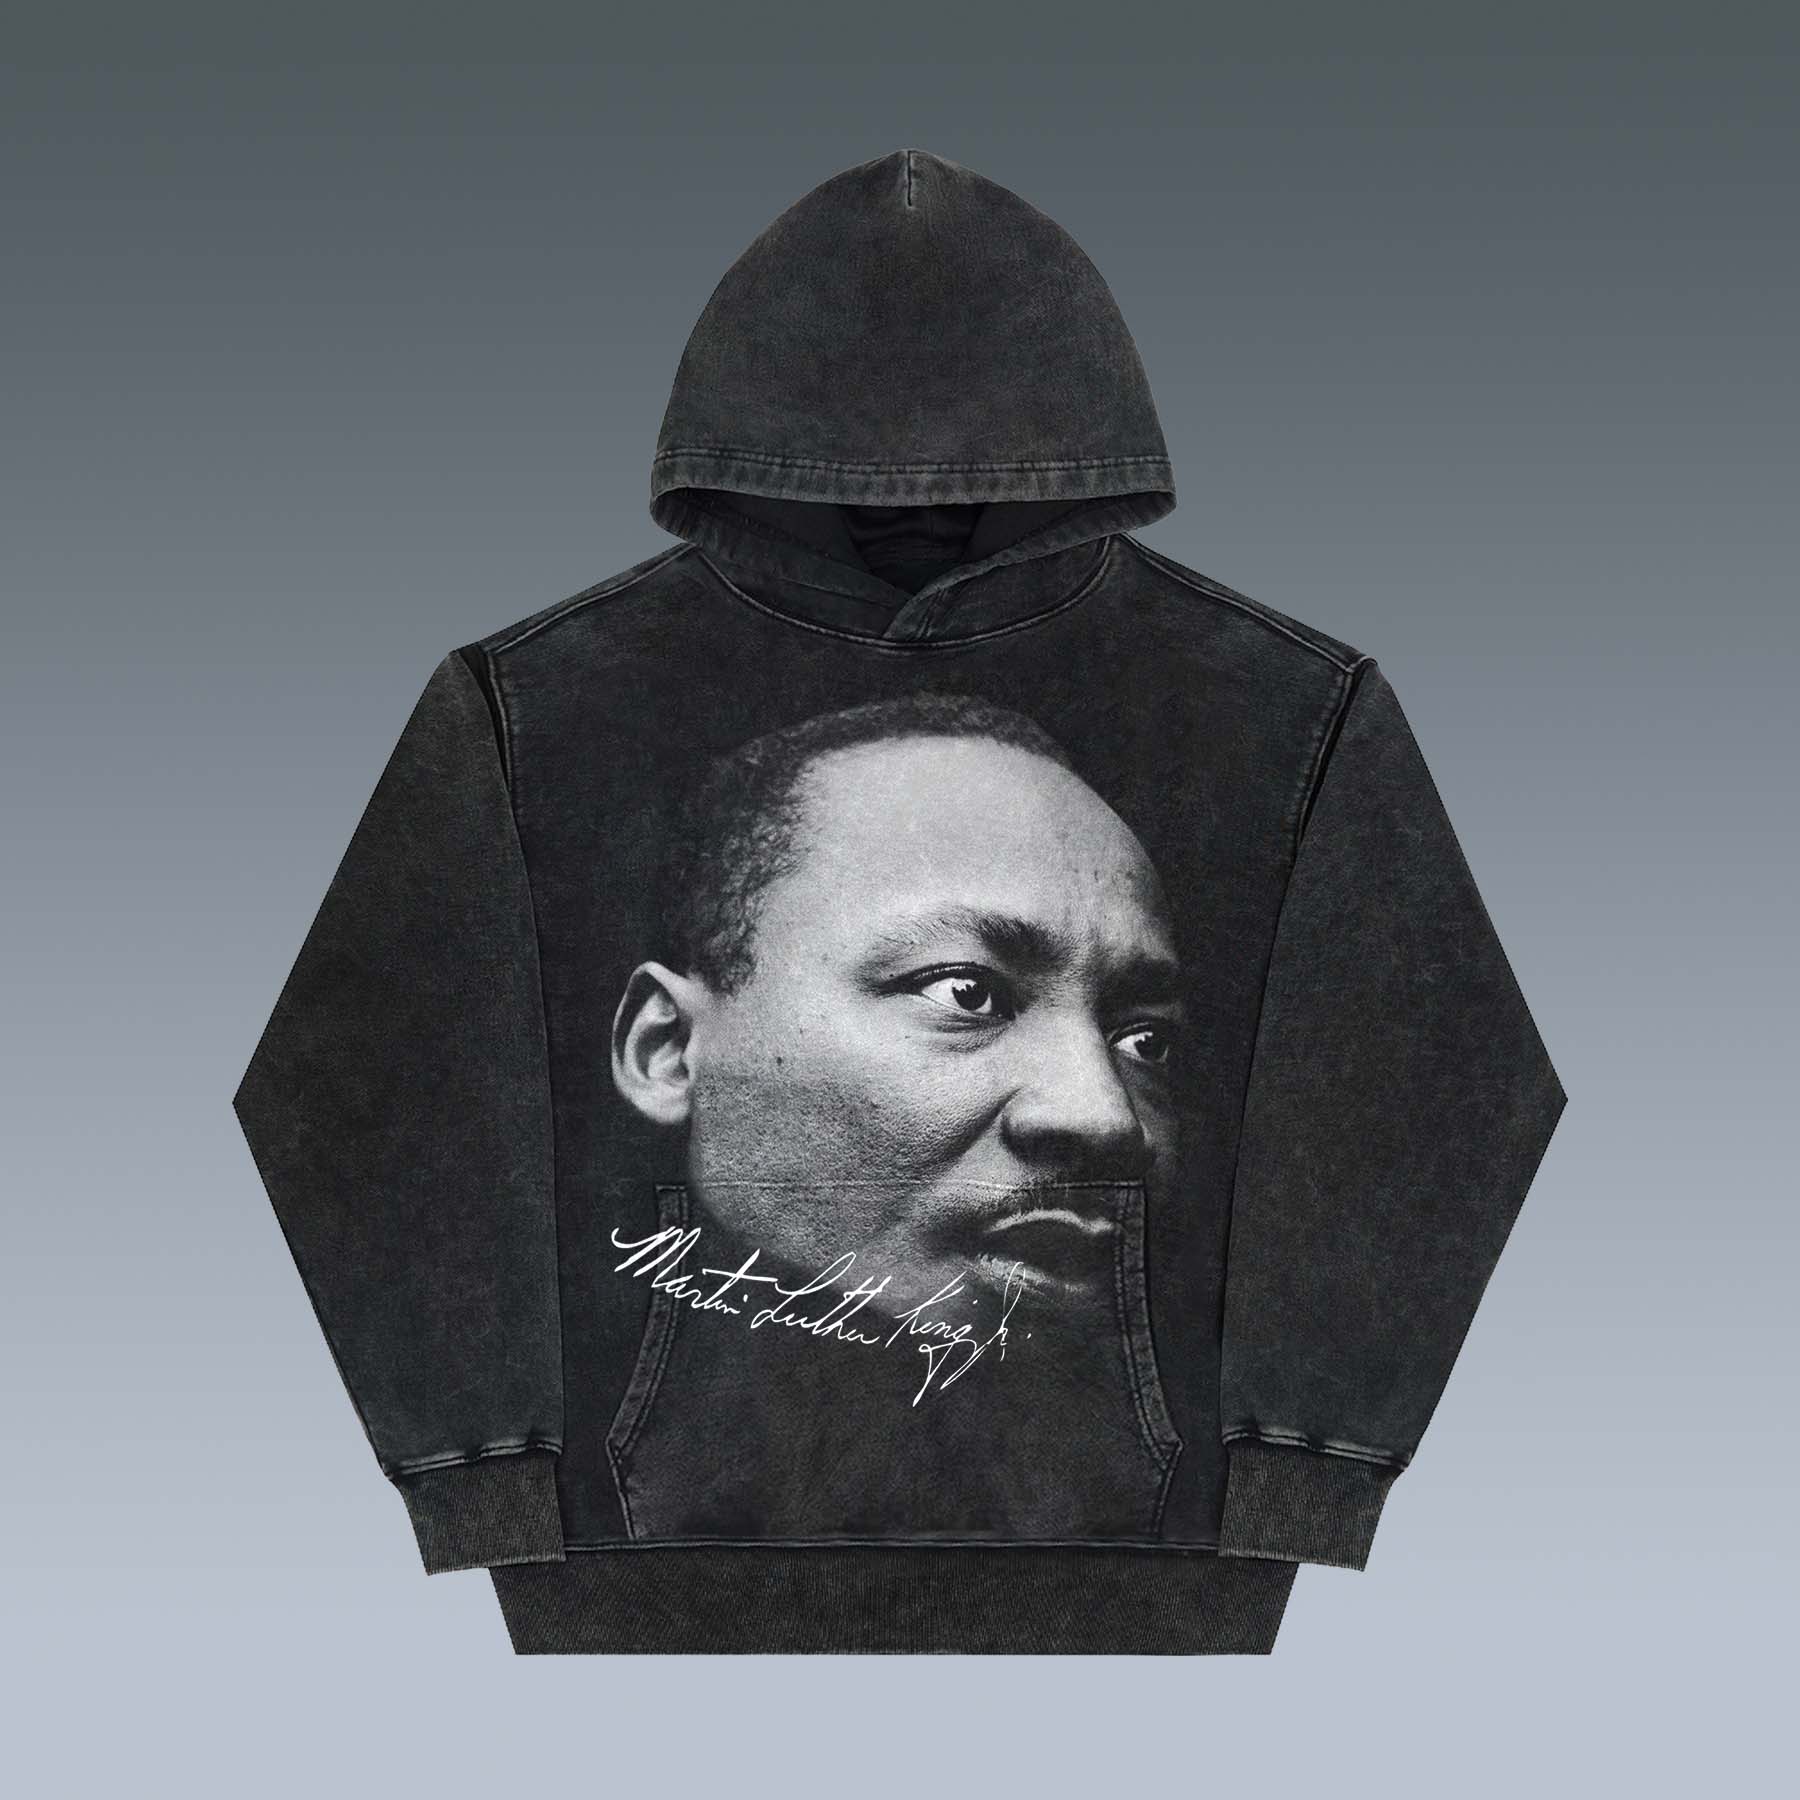 VINTAGE HOODIES | I HAVE A DREAM-MARTIN LUTHER KING